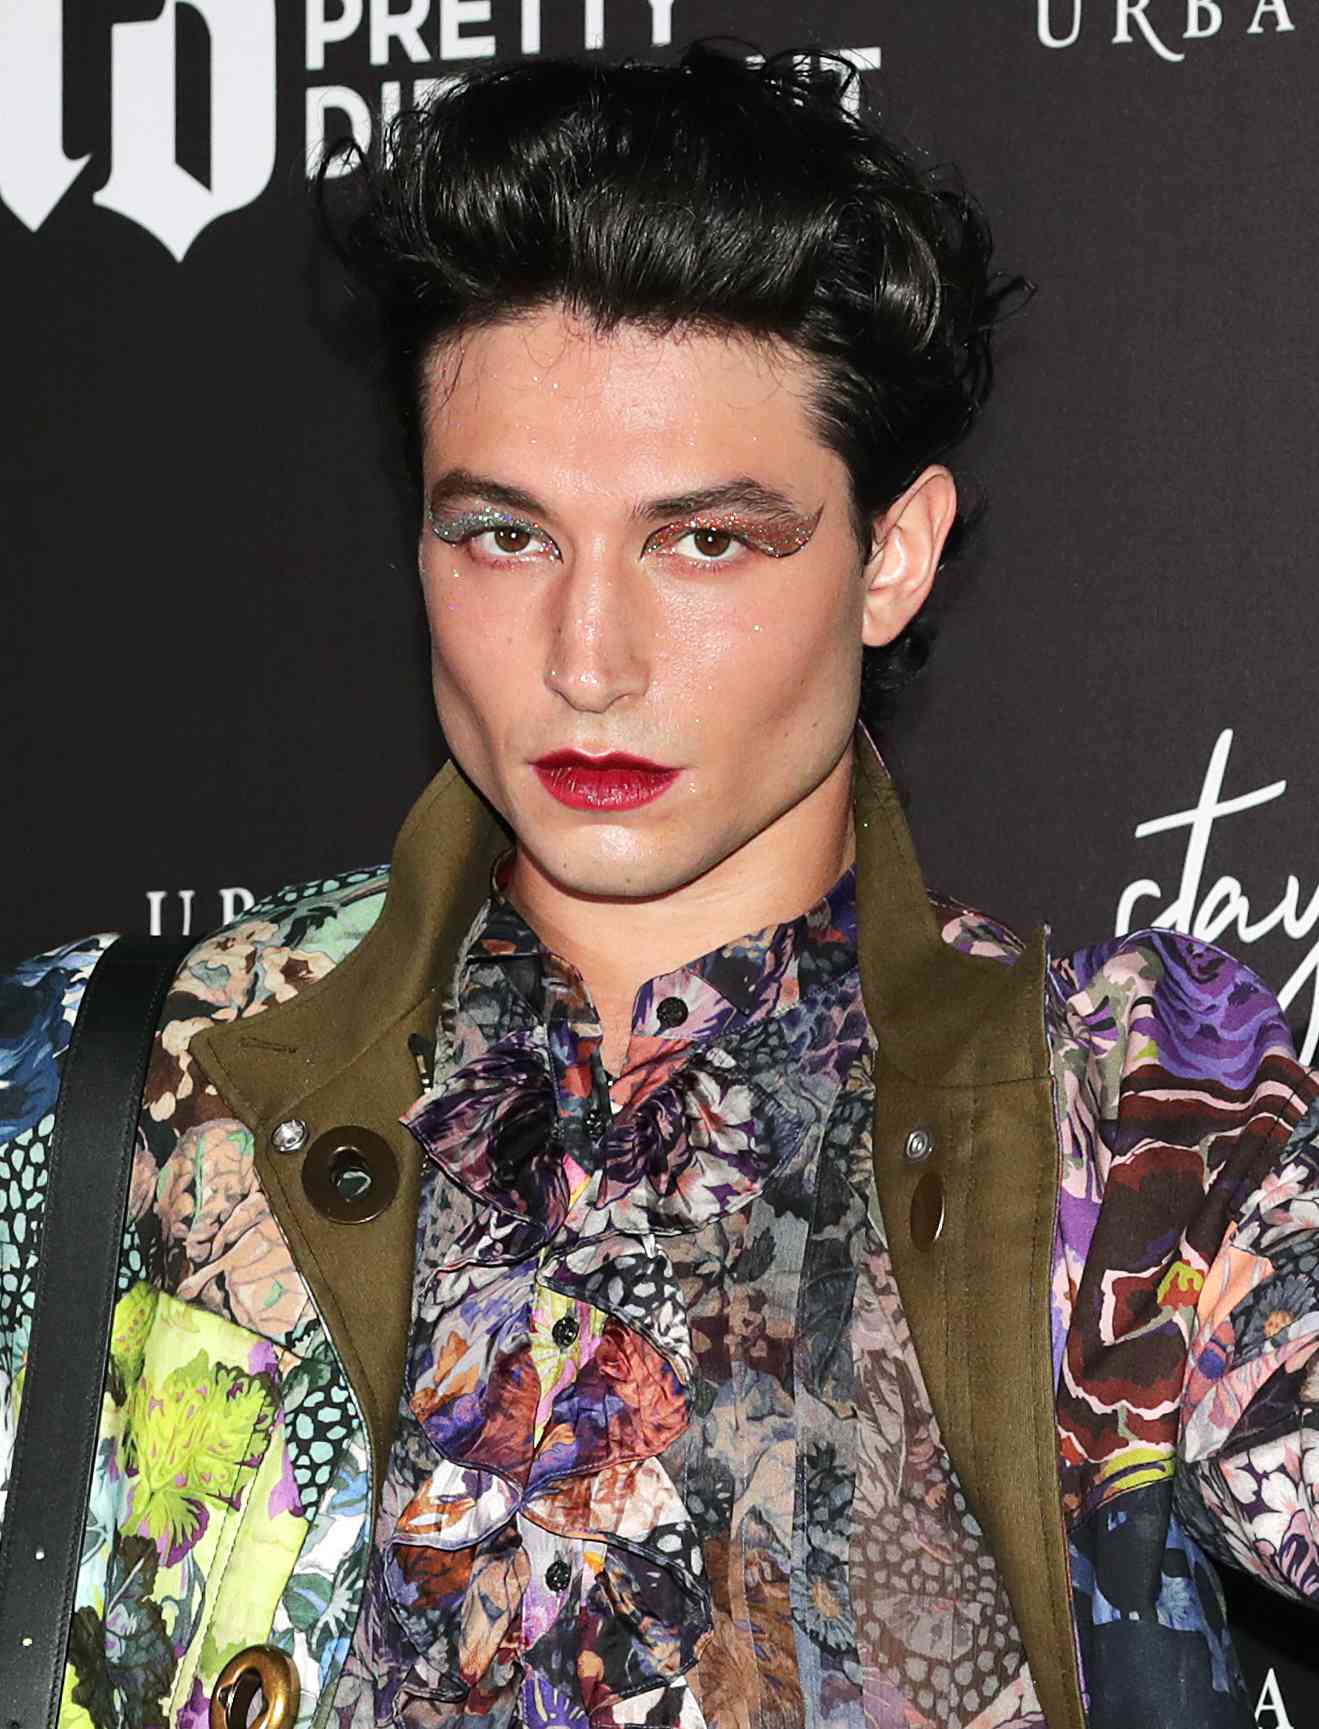 Actor Ezra Miller attends the photocall for 'URBAN DECAY' stayNAKED launch event on August 20, 2019 in Seoul, South Korea.